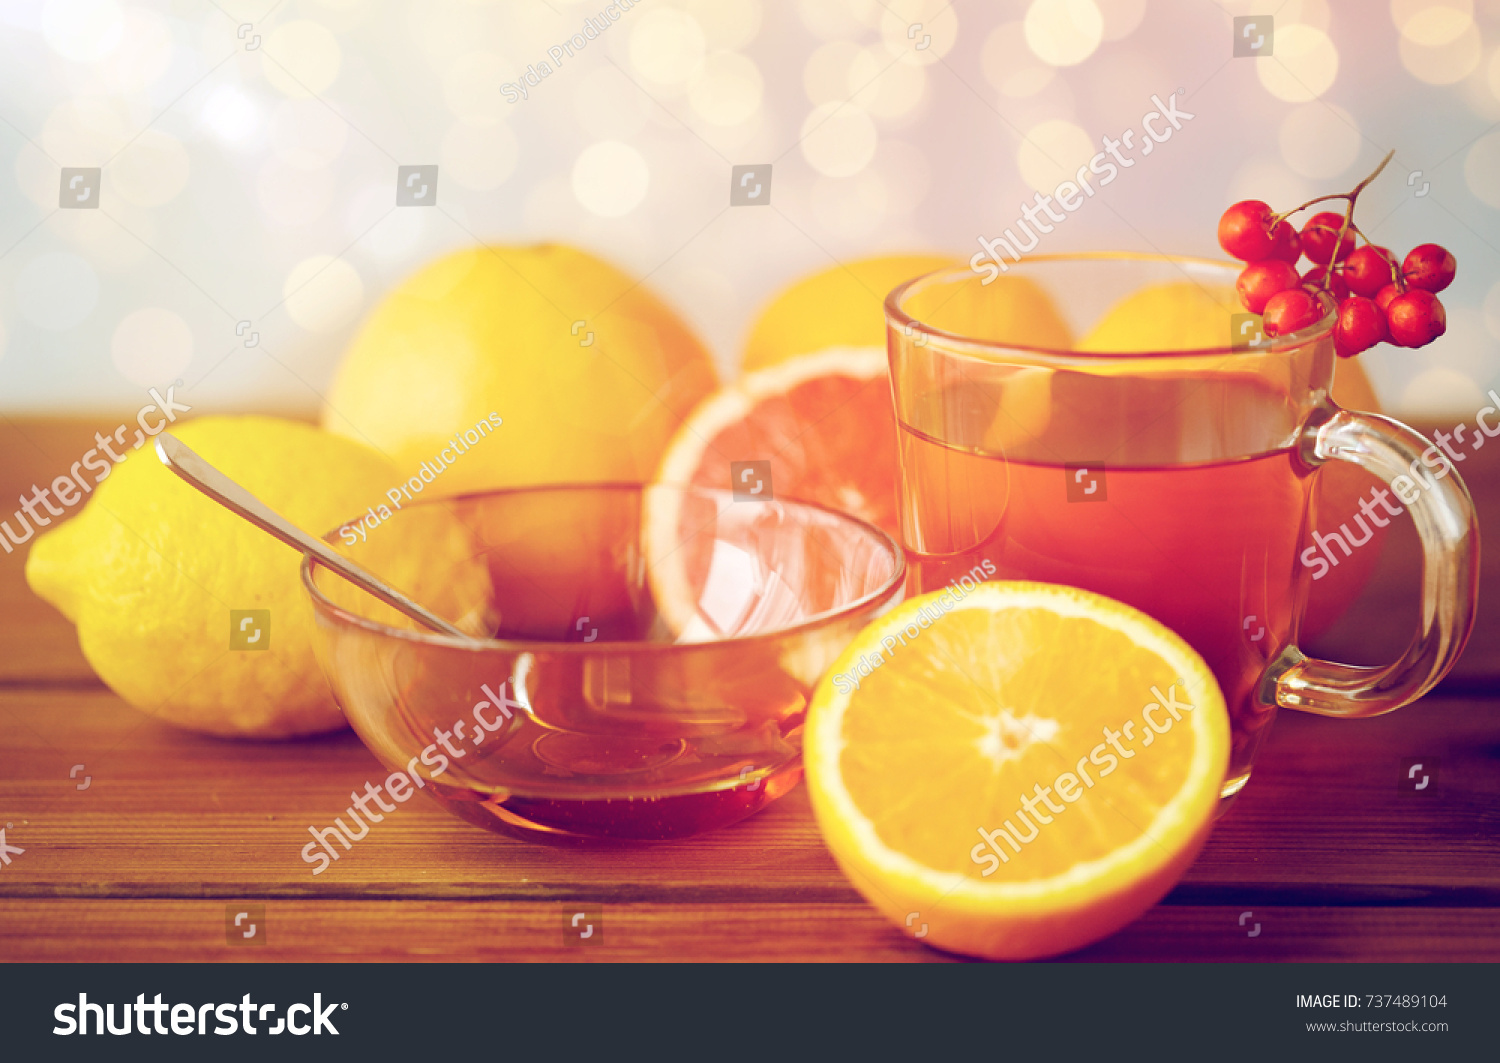 health, traditional medicine, folk remedy and ethnoscience concept - cup of tea with honey, lemon and rowanberry on wooden background #737489104